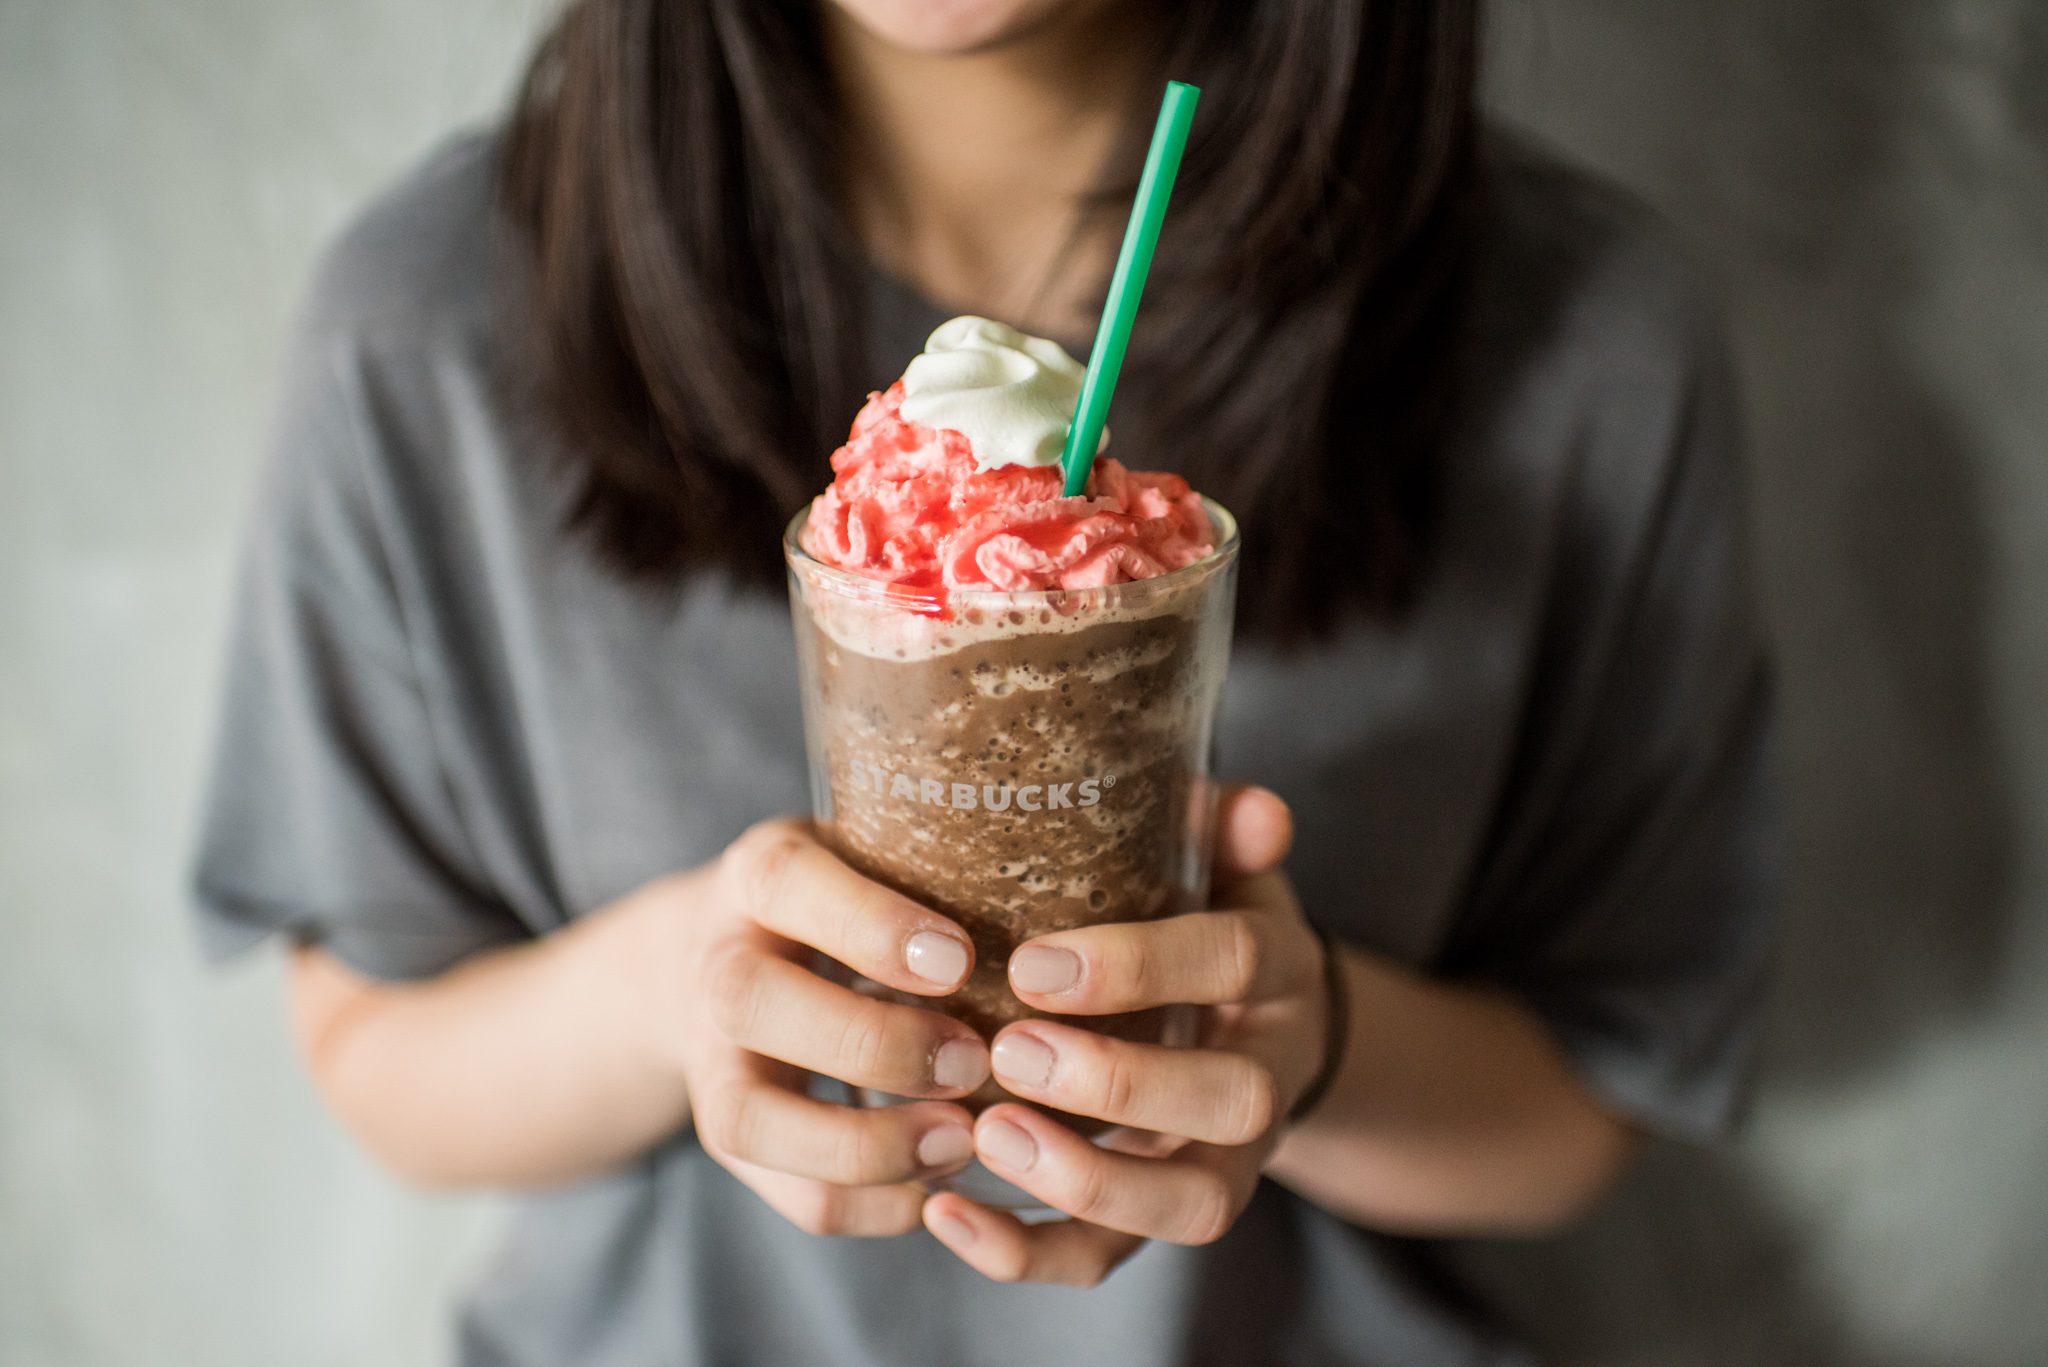 LOOK: This is the Santa Hat frappe, the new Starbucks Christmas 2016 drink